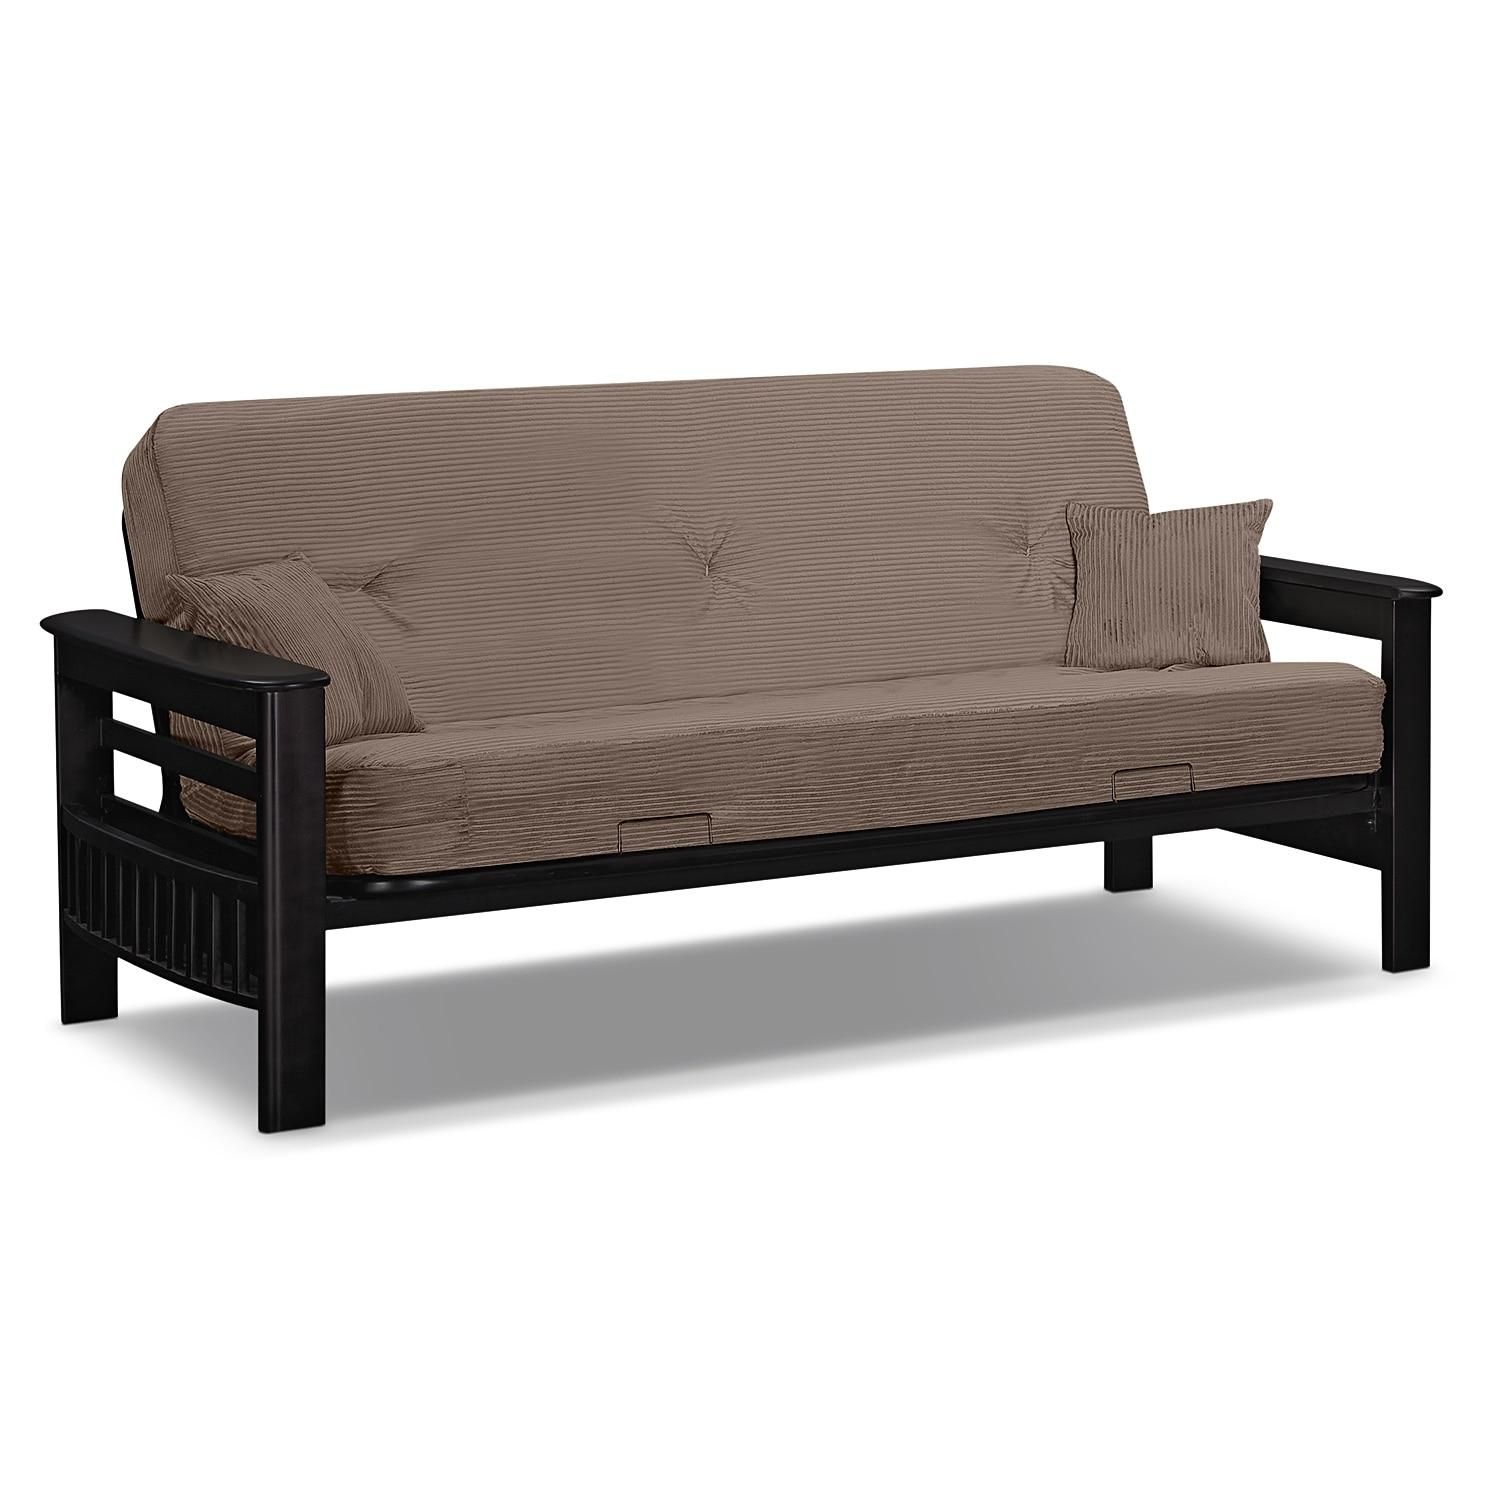 Tampa Futon Sofa Bed – Beige | Value City Furniture With Sofas Tampa (View 5 of 20)